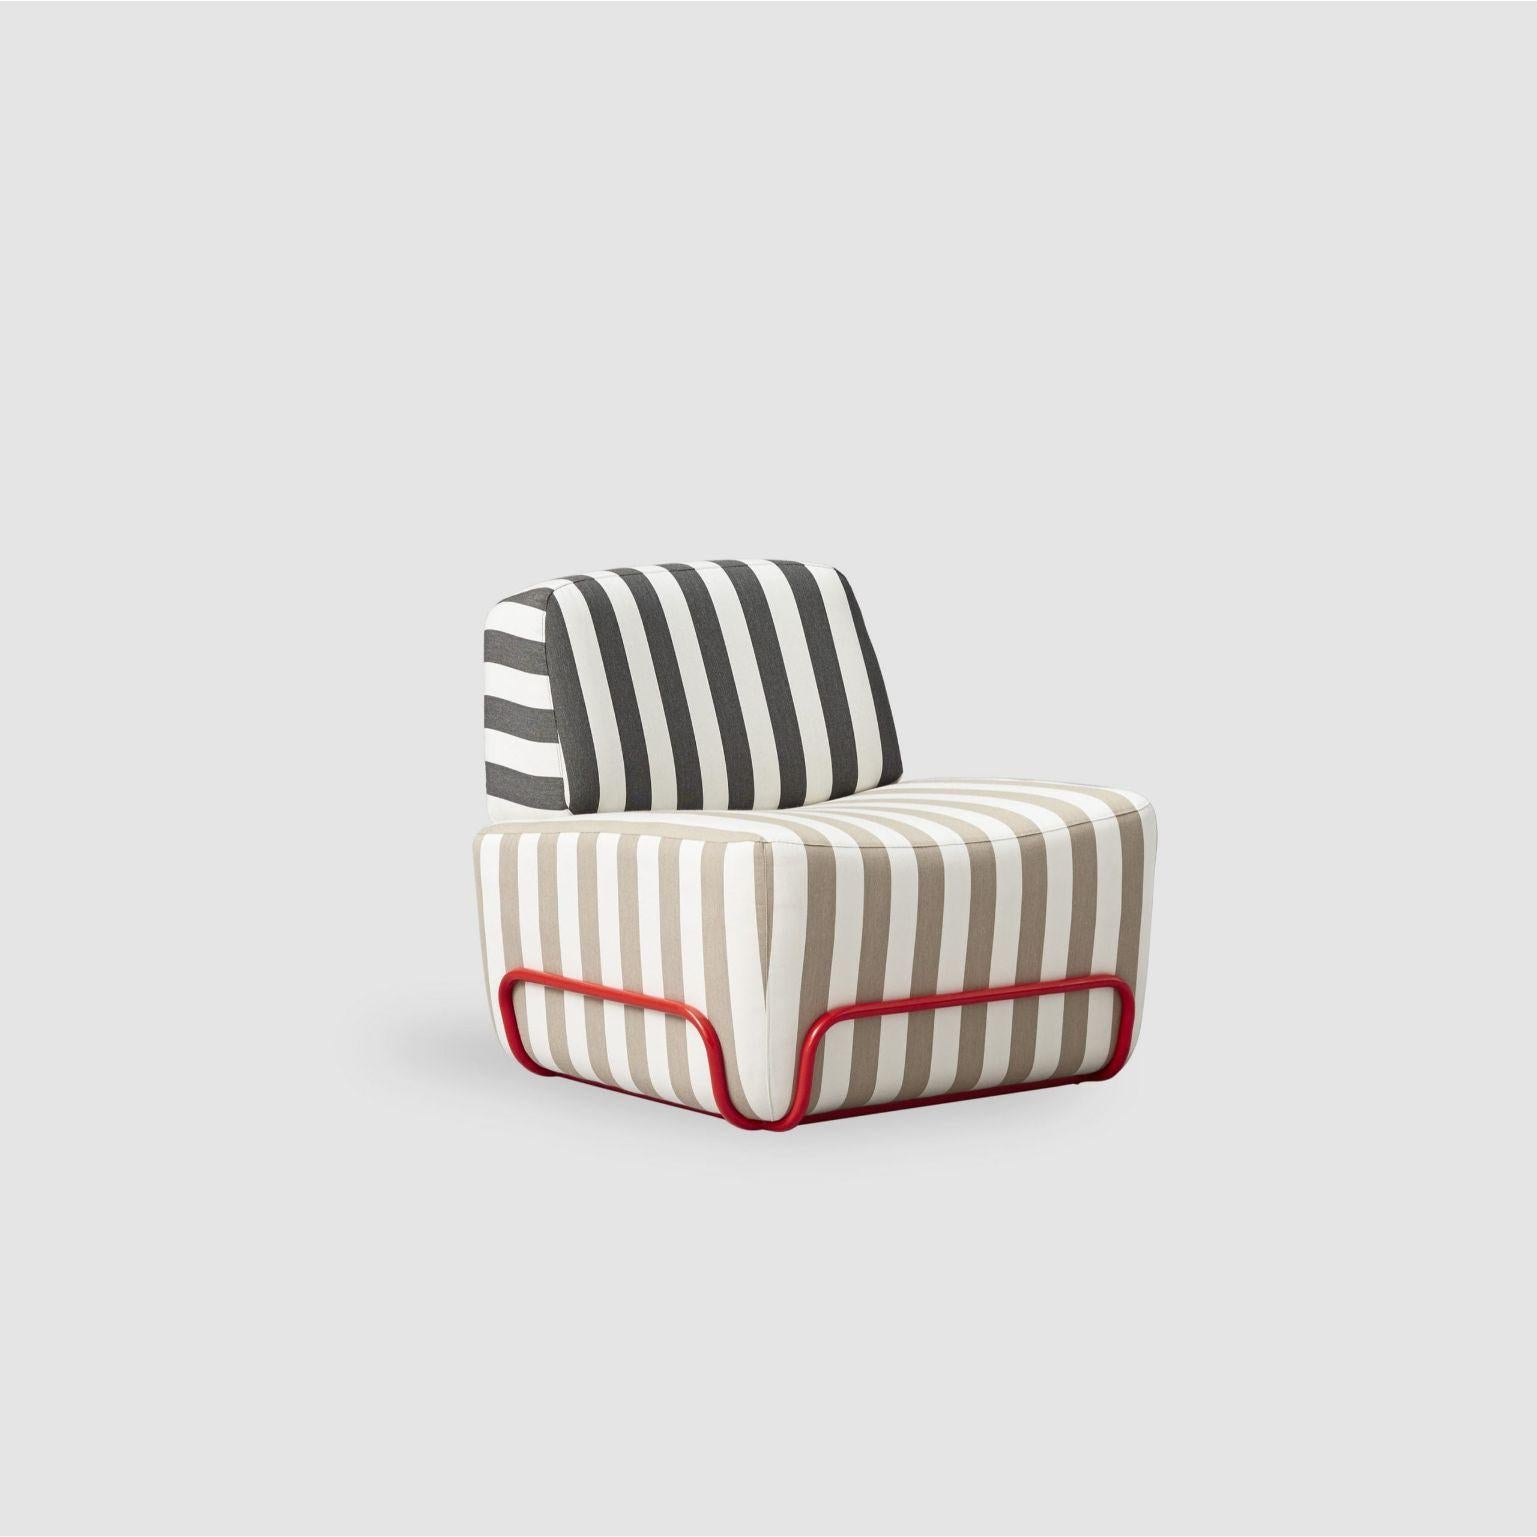 Pigro armchair by Studio Pastina.
Dimensions: W83, D90, H77, Seat 42.
Materials: Pine wood structure, tablex and particles board.
Foam CMHR (high resilience and flame retardant) for all our cushion filling systems.
Painted iron structure